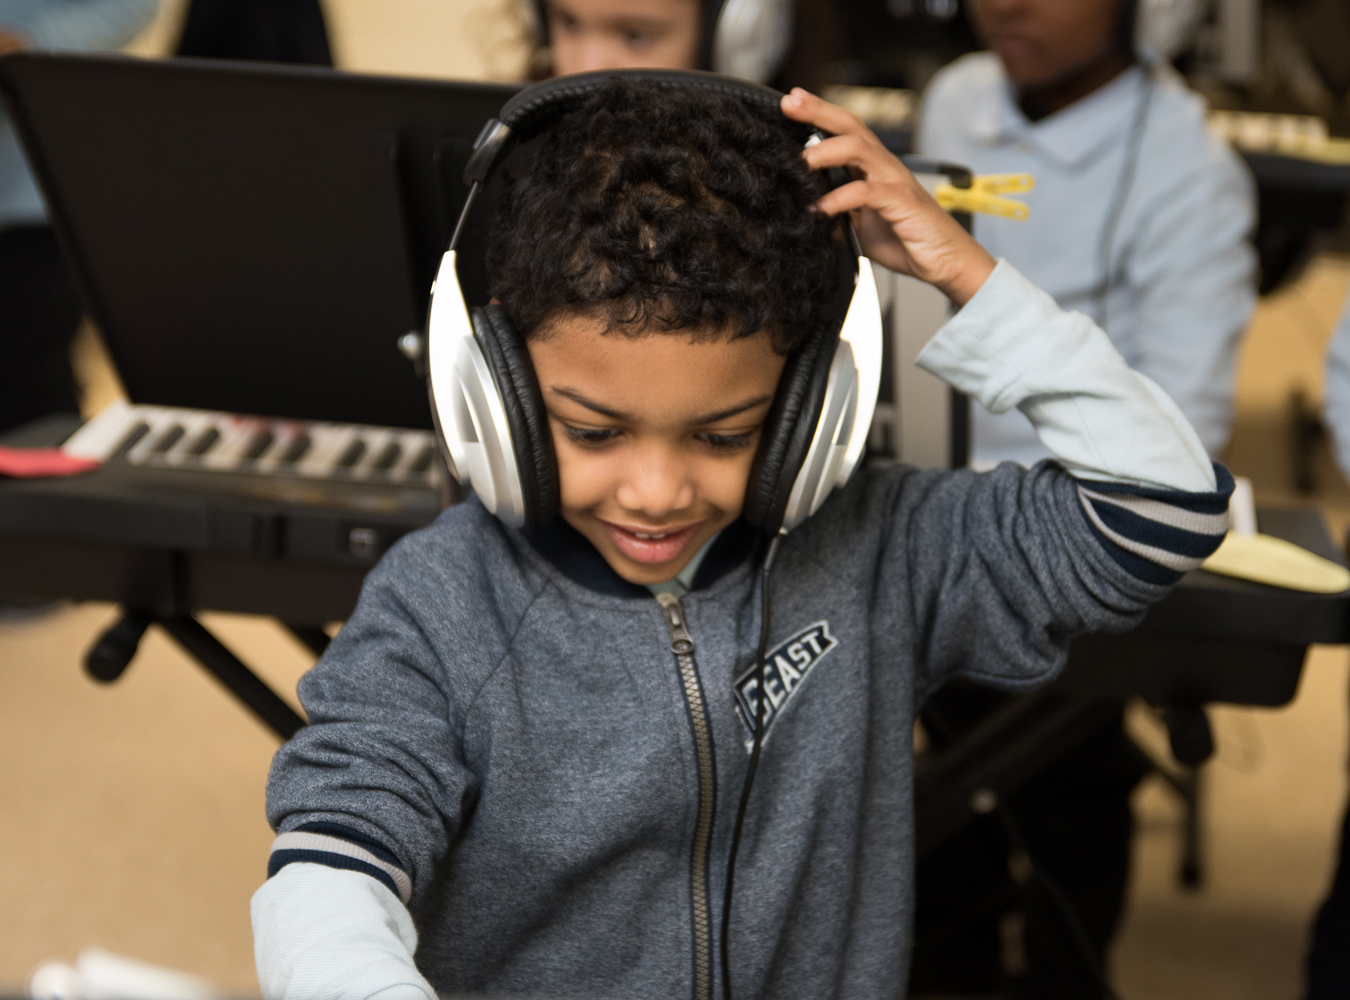 An adorable young boy grasps his oversized headphones with one hand as he smiles with joy while he plays piano.